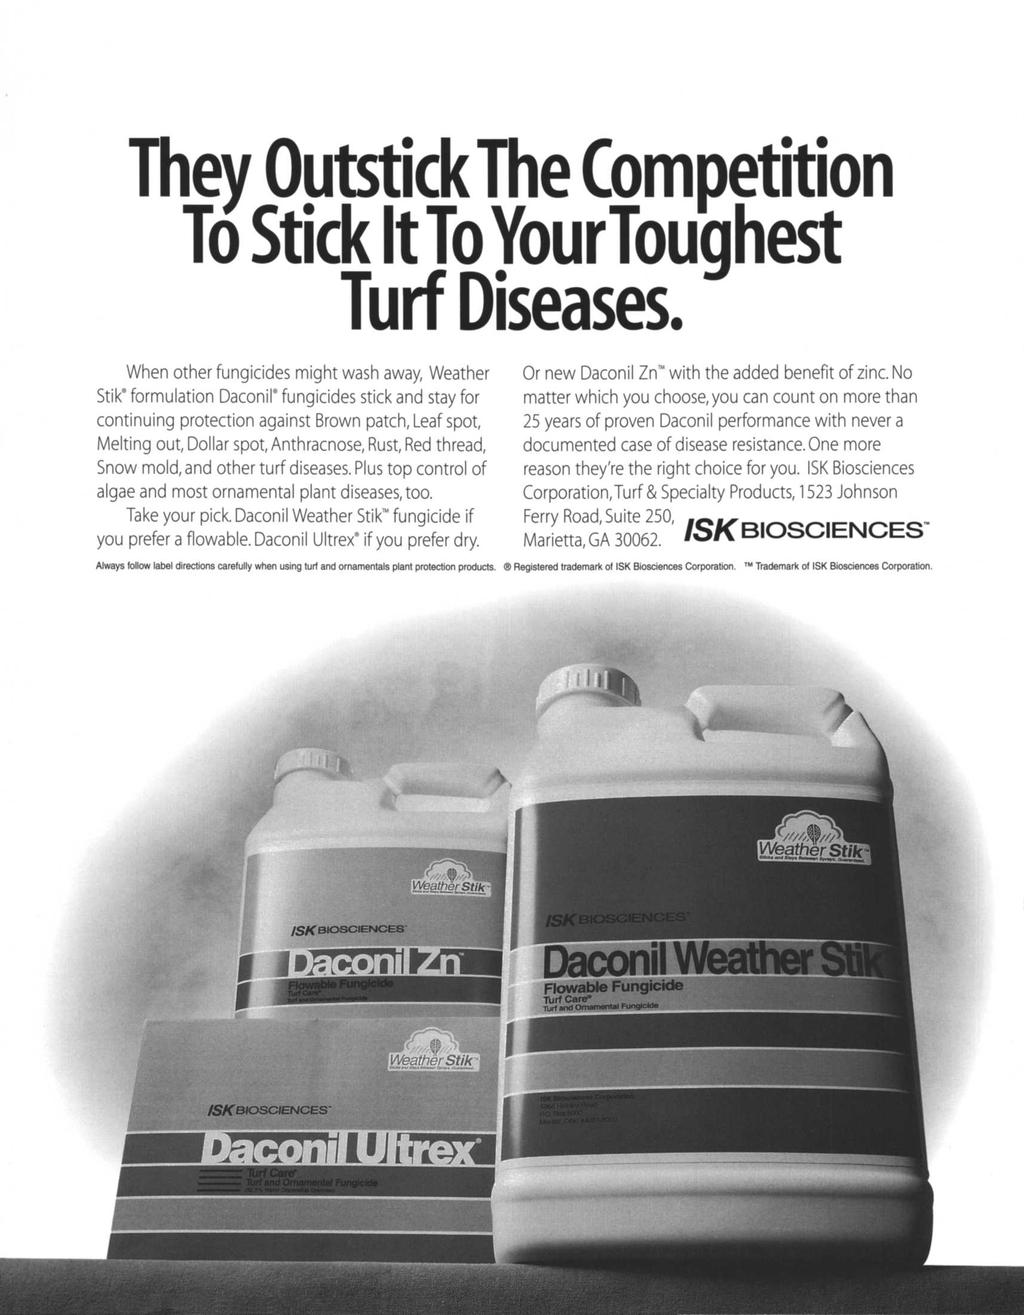 They Outstick The Competition To Stick ItTo YourToughest Turf Diseases.